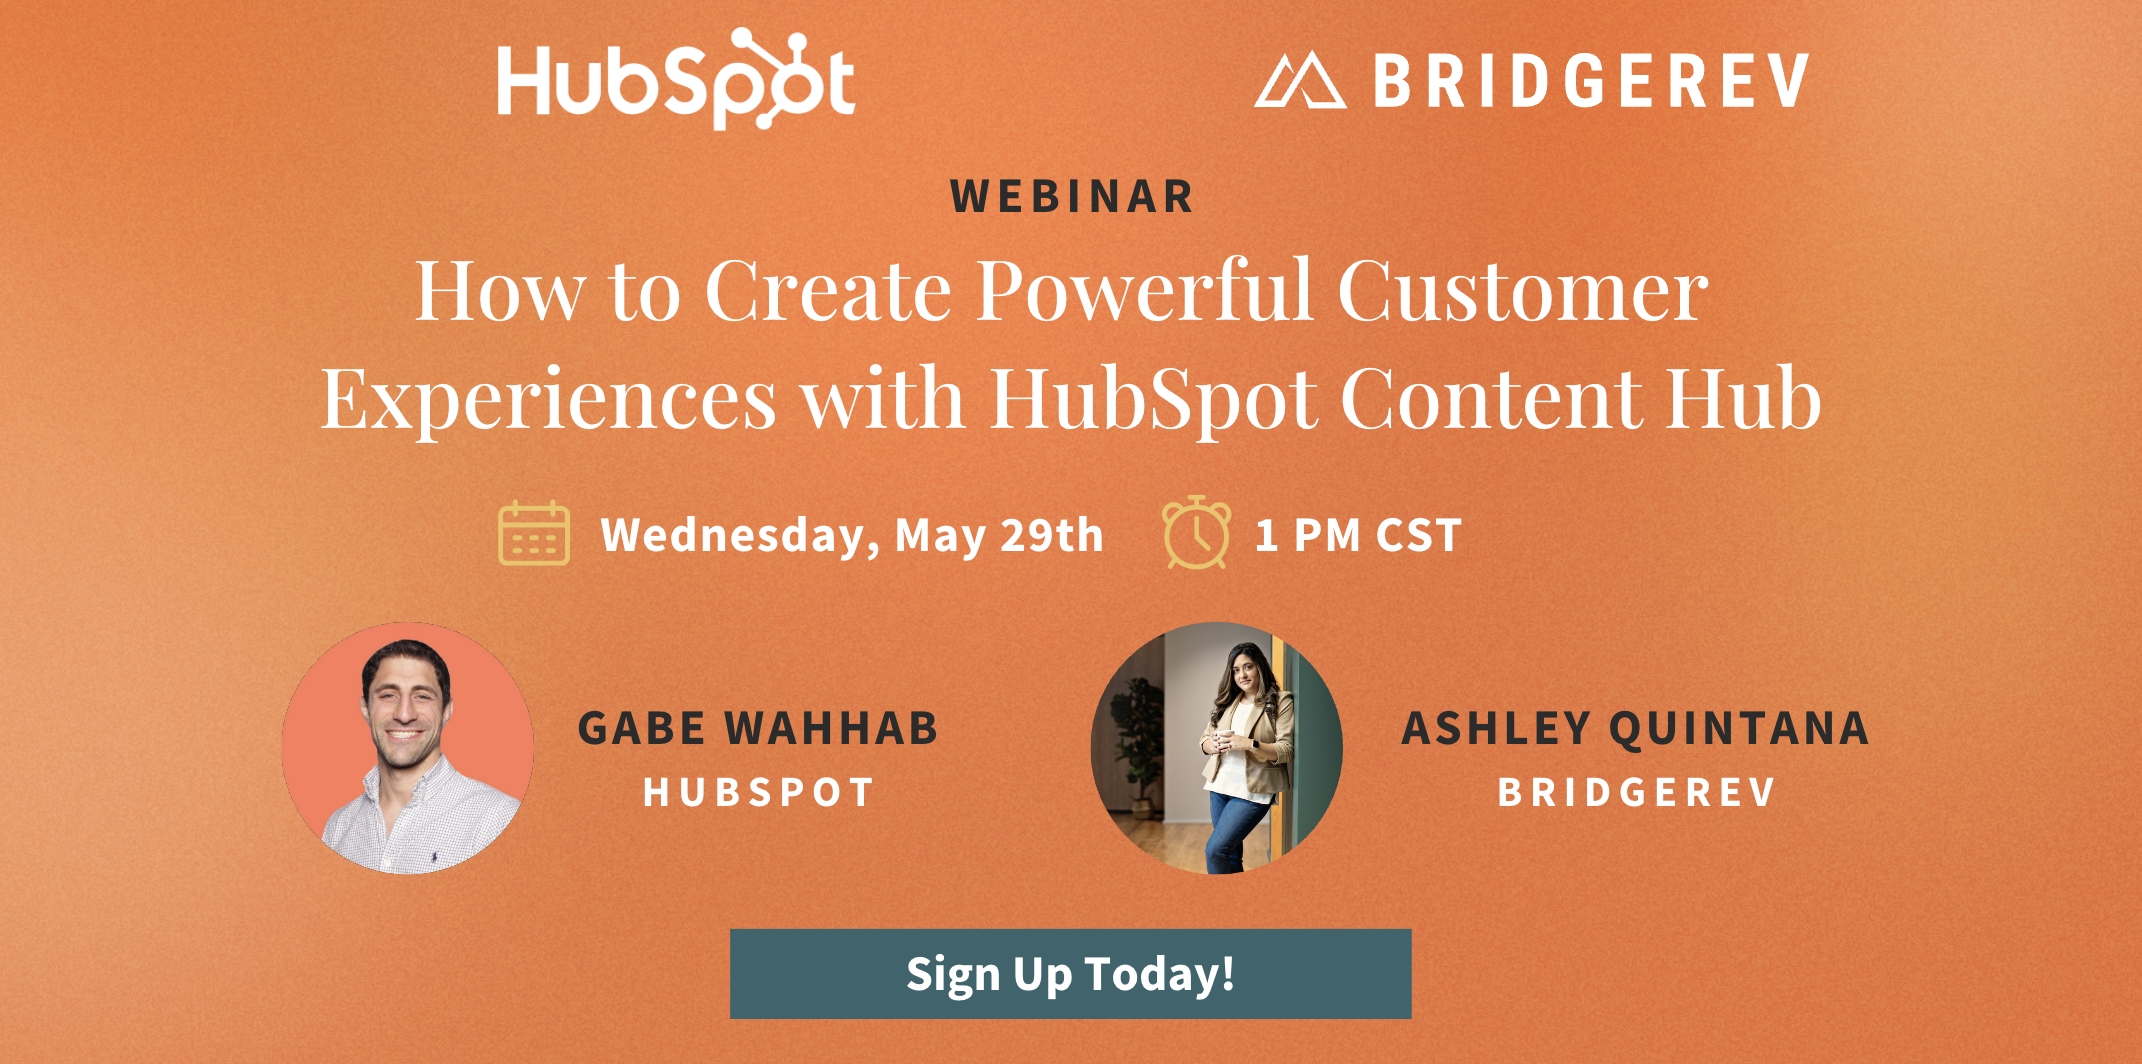 Webinar: How to Create Powerful Customer Experiences with HubSpot Content Hub